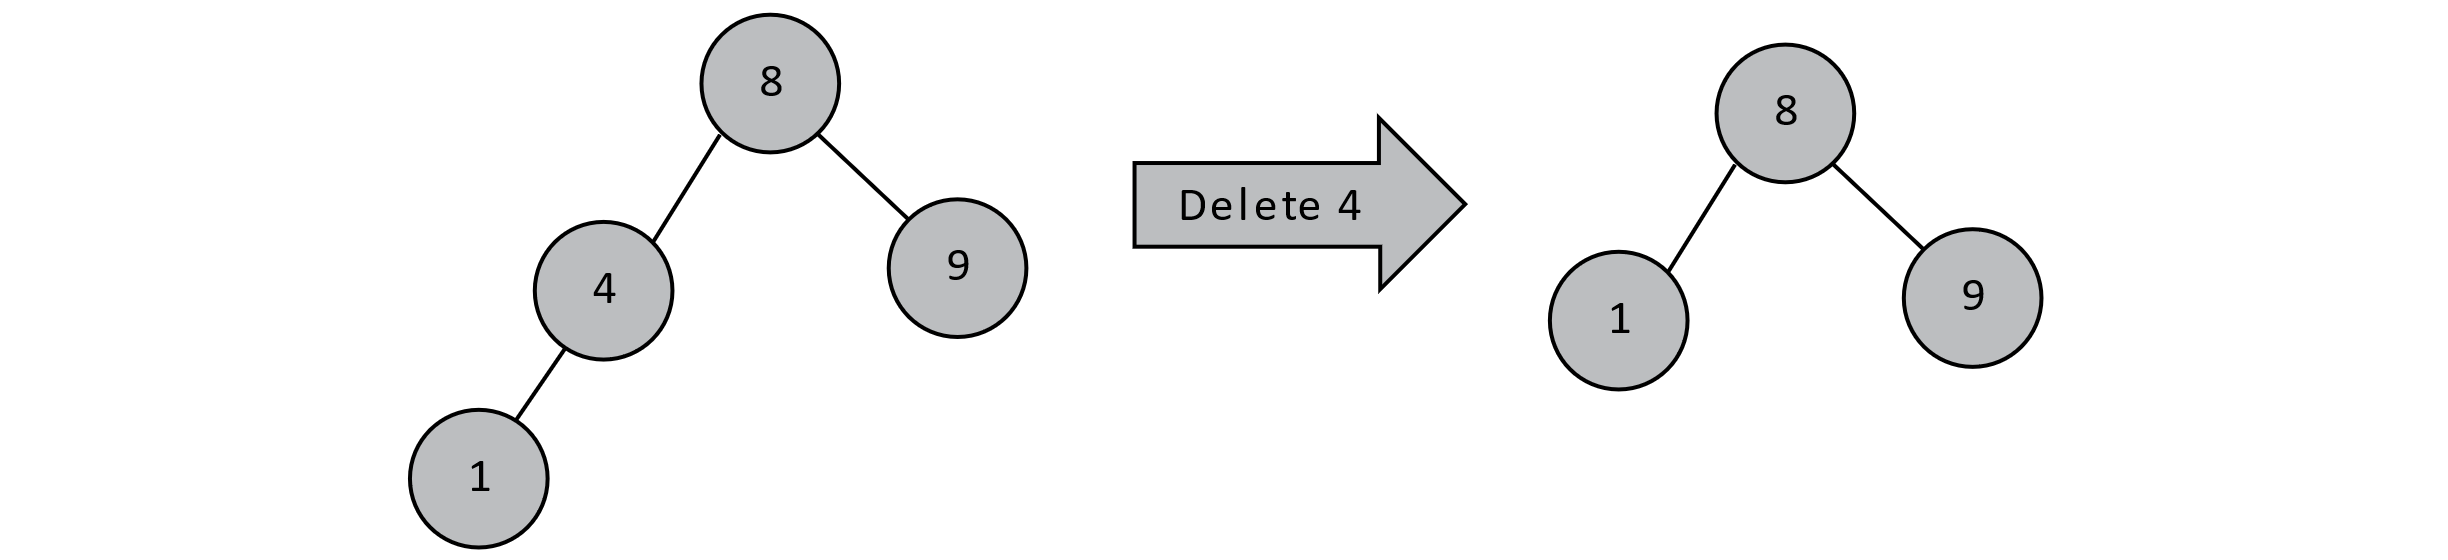 Deleting a node with a single child by shifting a subtree up.